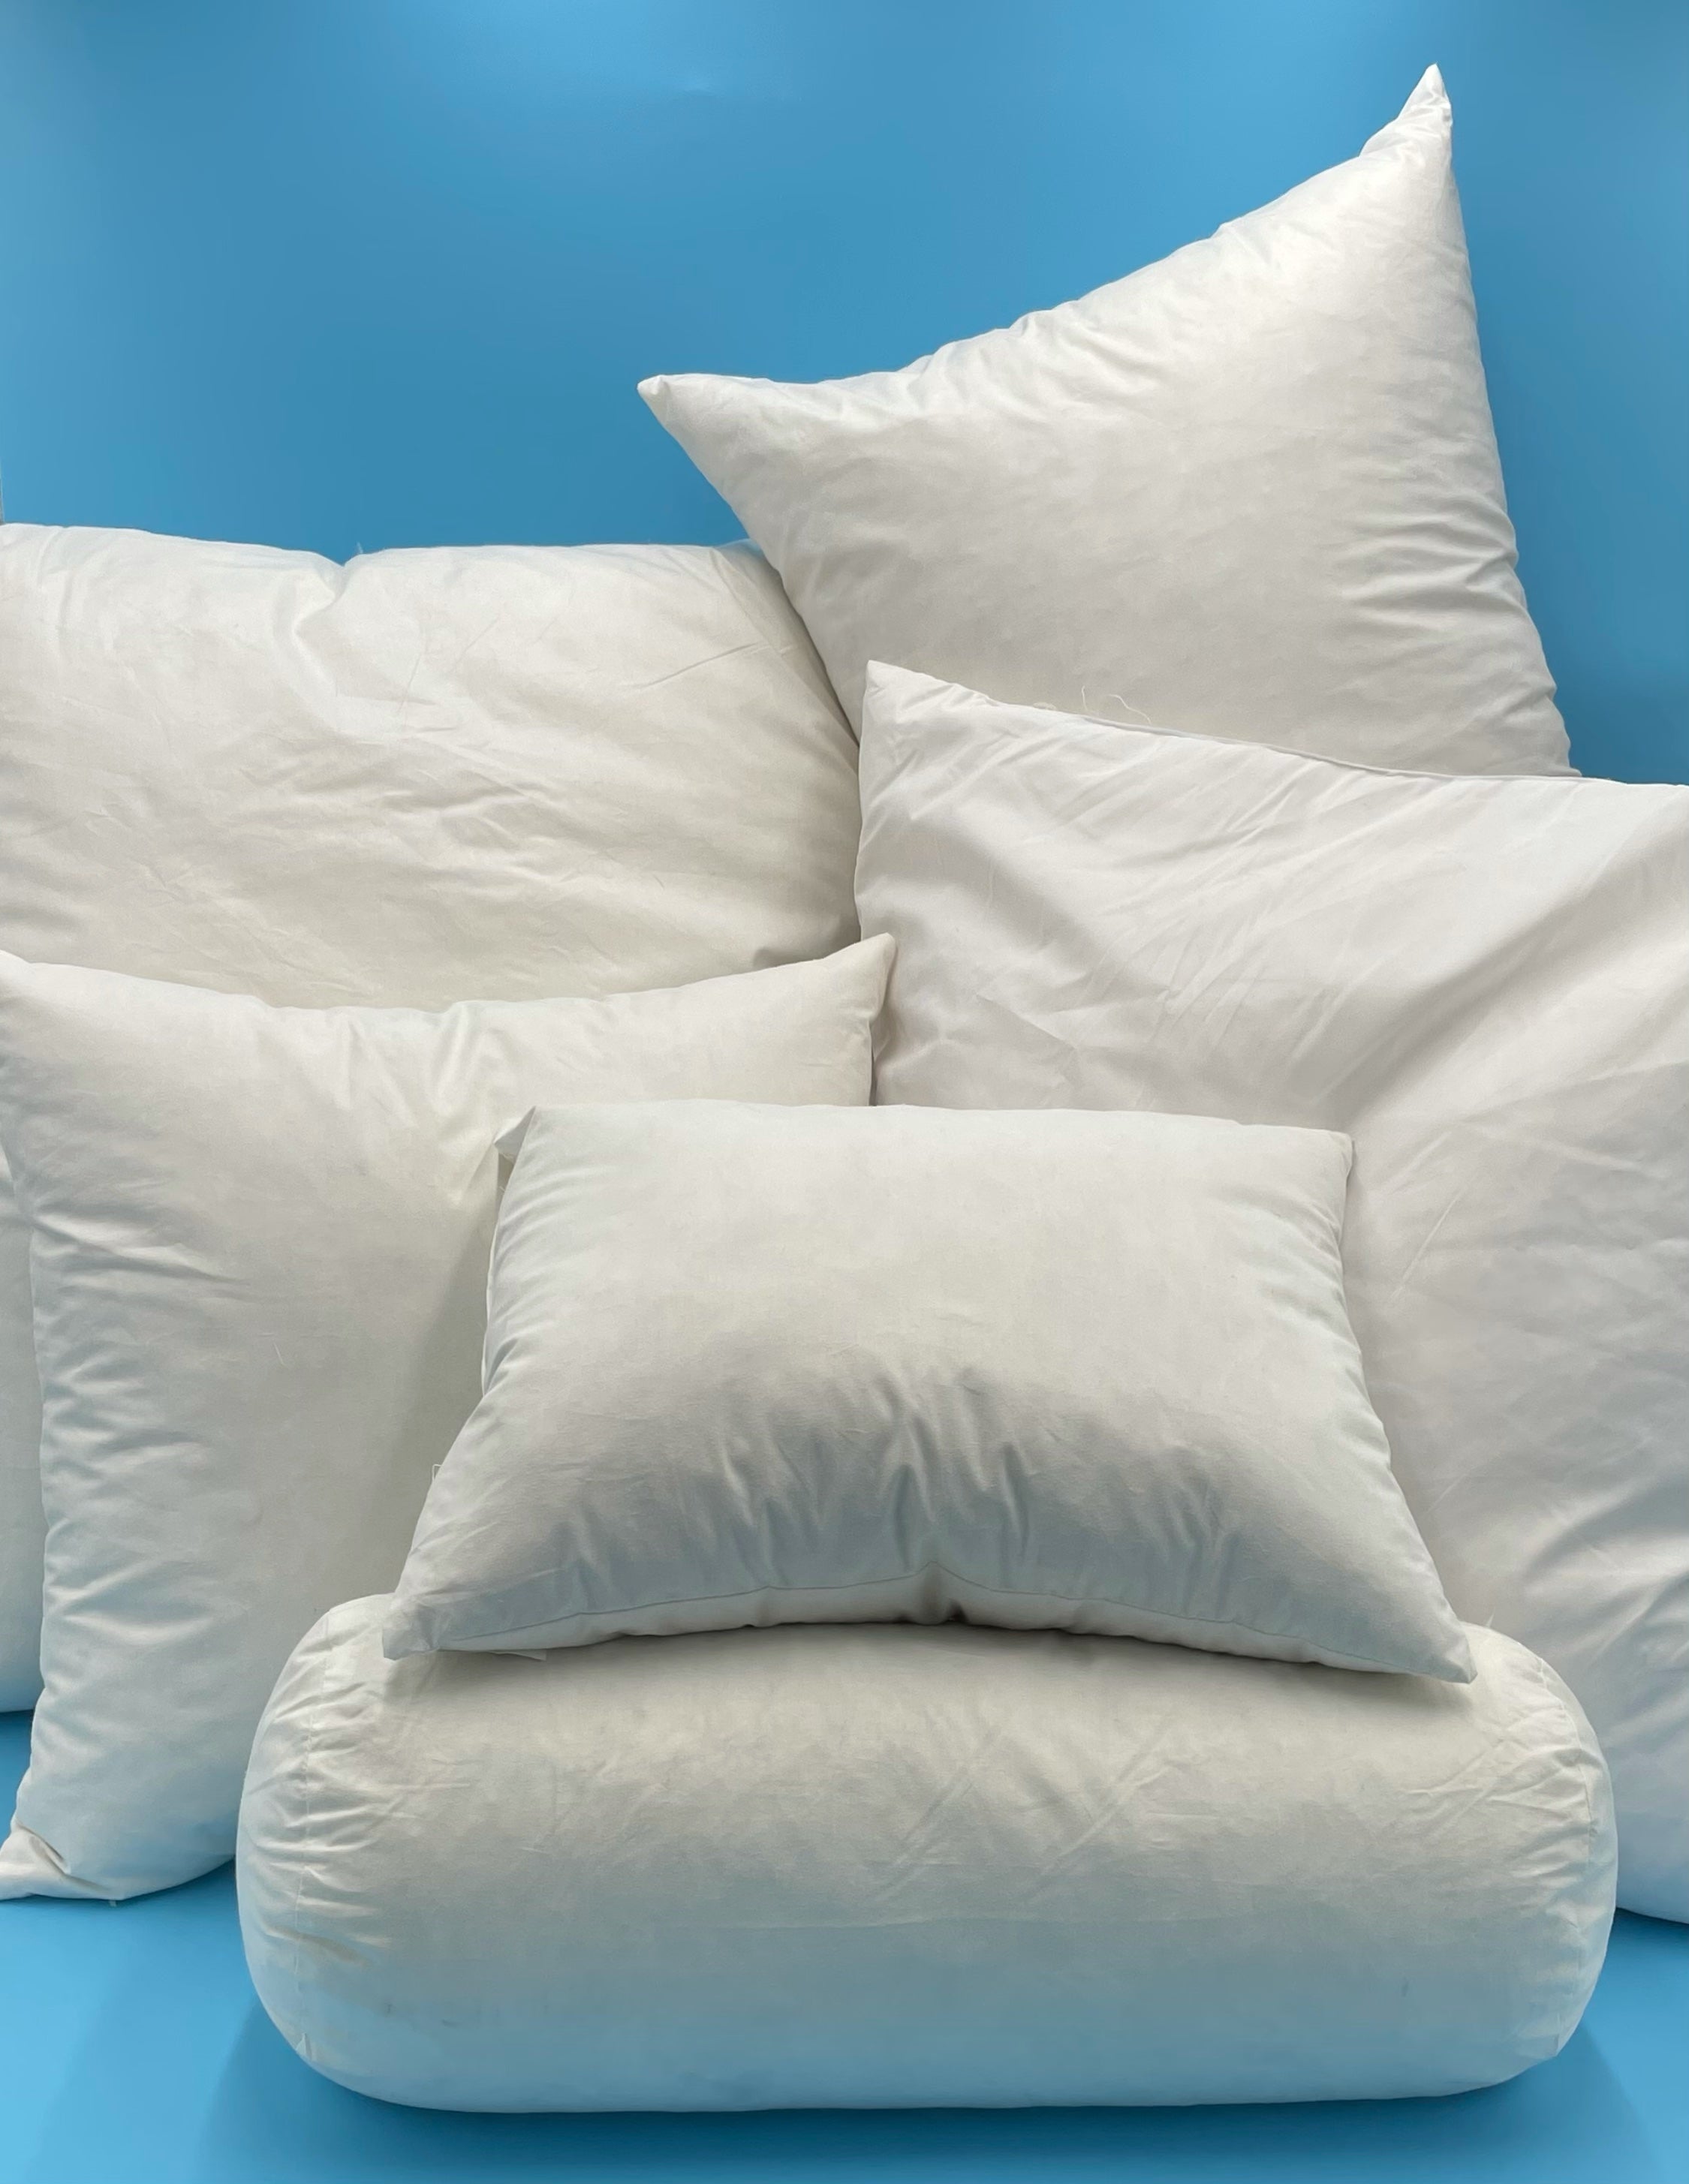 Pillow - 10/90 Down/Feather Loose Fill. 10lbs - 10% Down 90% Feather Pillows